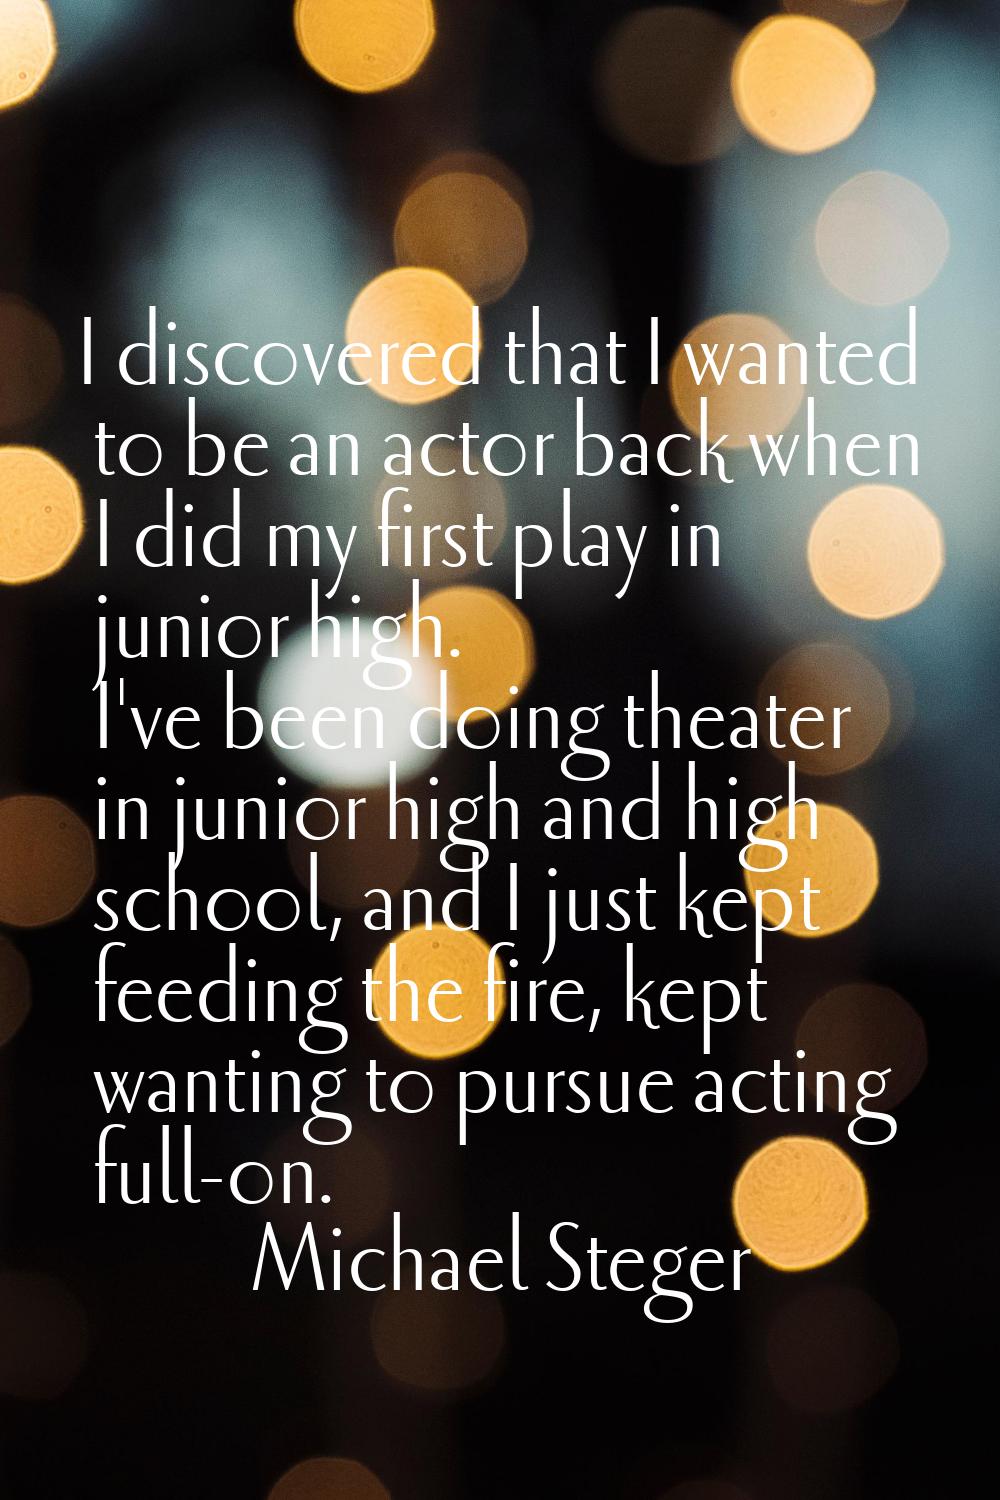 I discovered that I wanted to be an actor back when I did my first play in junior high. I've been d